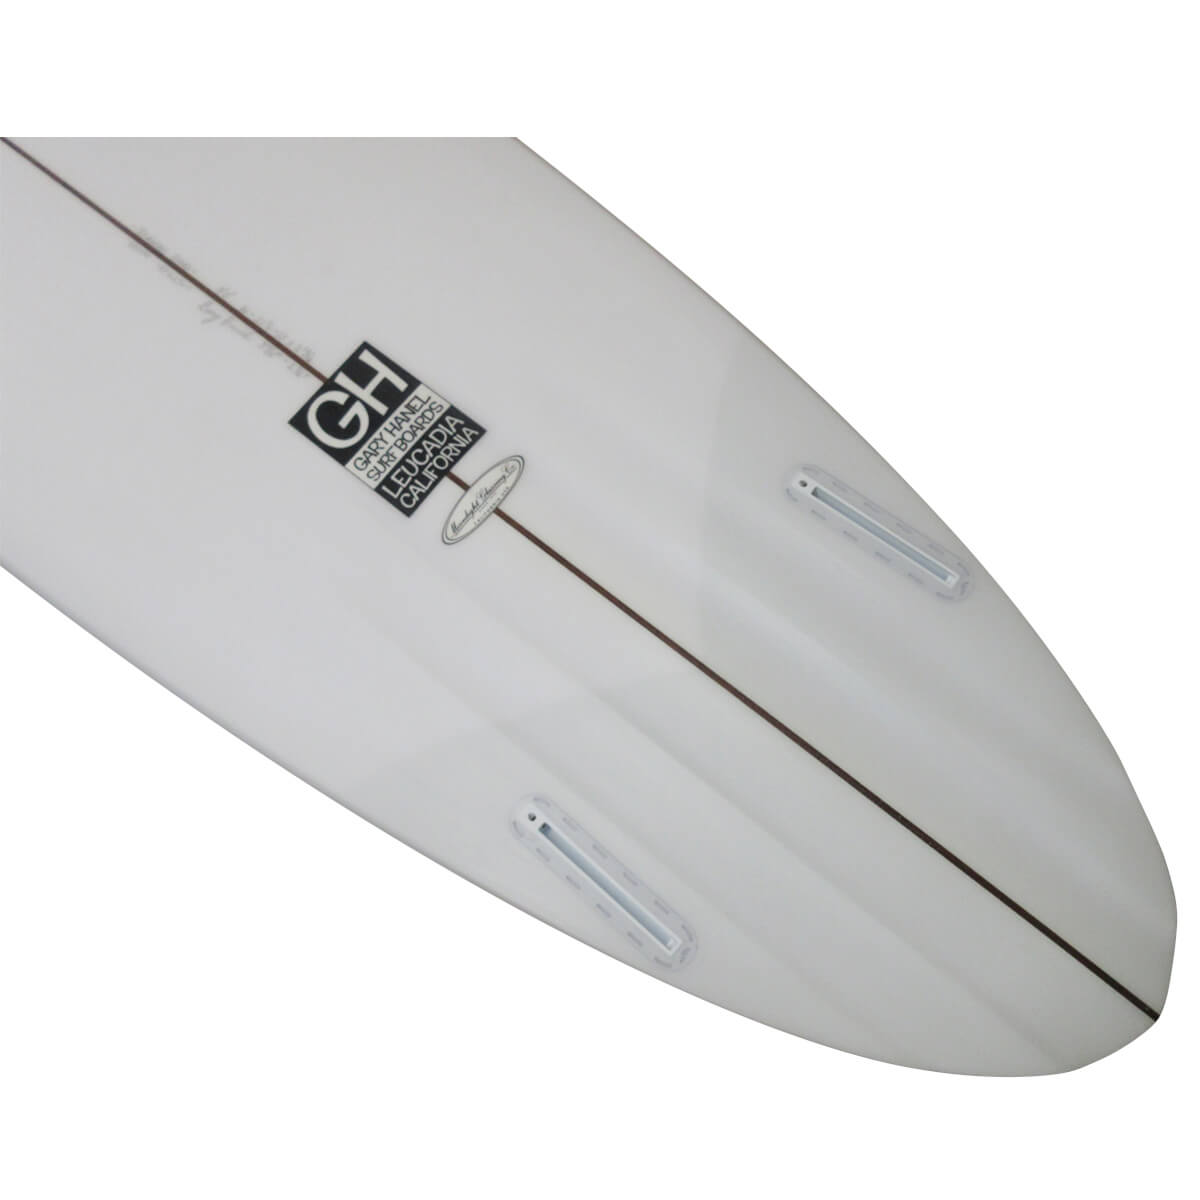 Gary Hanel Surfboards : ROUND PIN TWIN 4CH 7`0